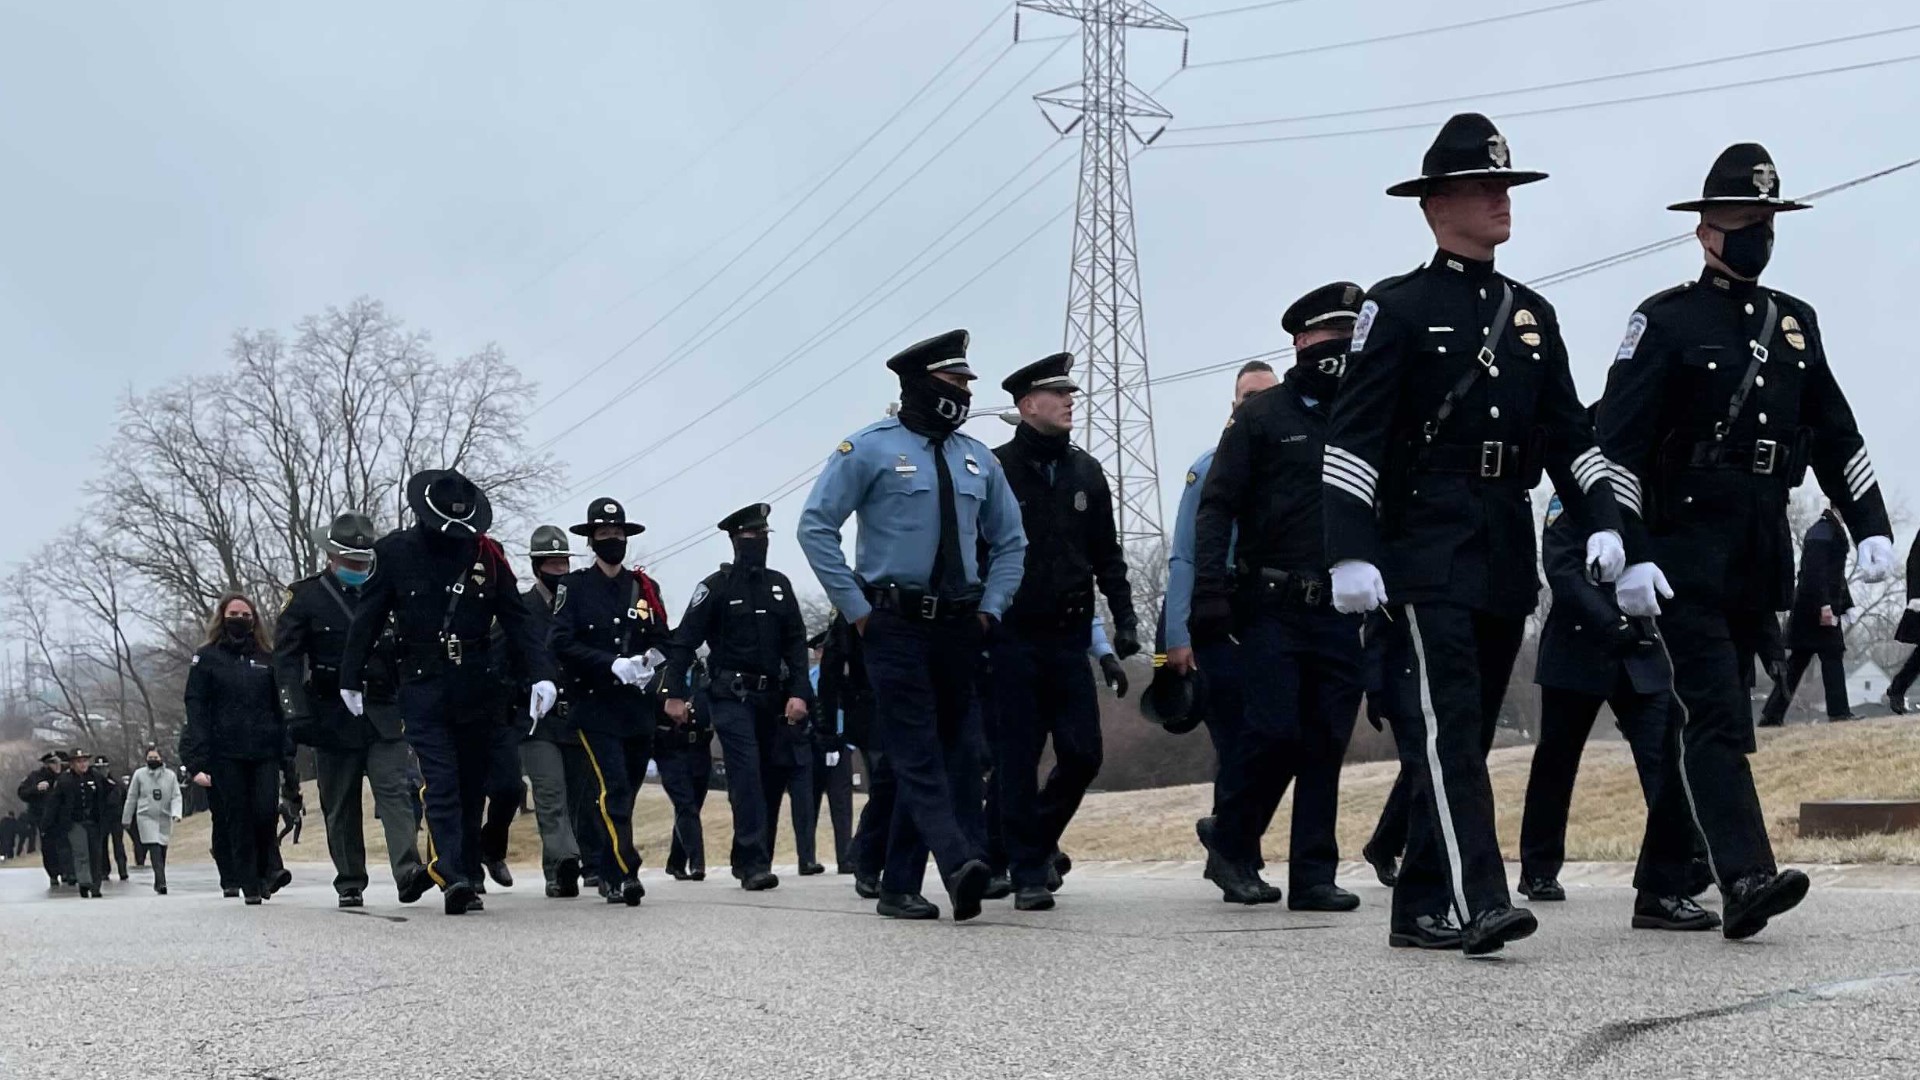 Killed in the line of duty Jan. 18, Stalker is being remembered, honored and mourned by loved ones, brothers and sisters in blue, Toledo-area community and beyond.